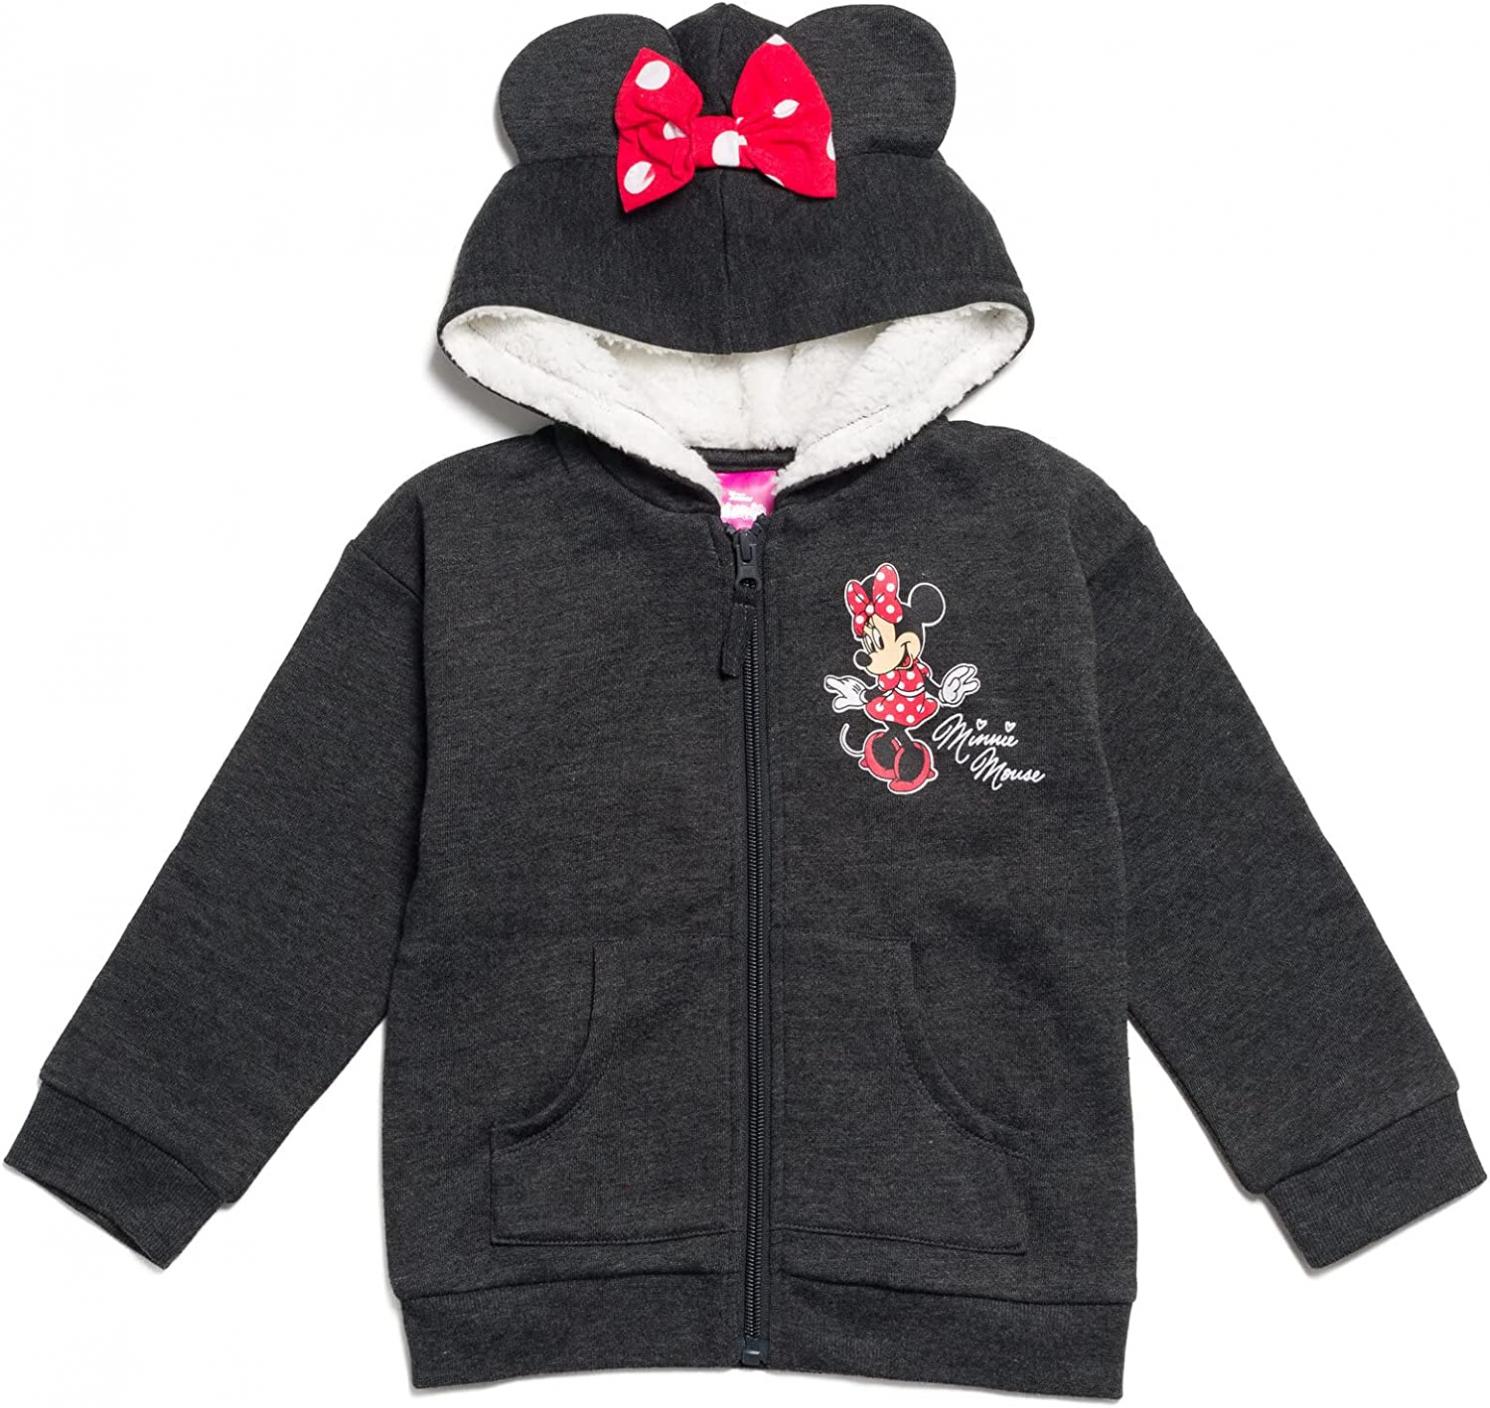 Disney Mickey Mouse Minnie Mouse Lion King Fleece Zip Up Hoodie Newborn to Toddler